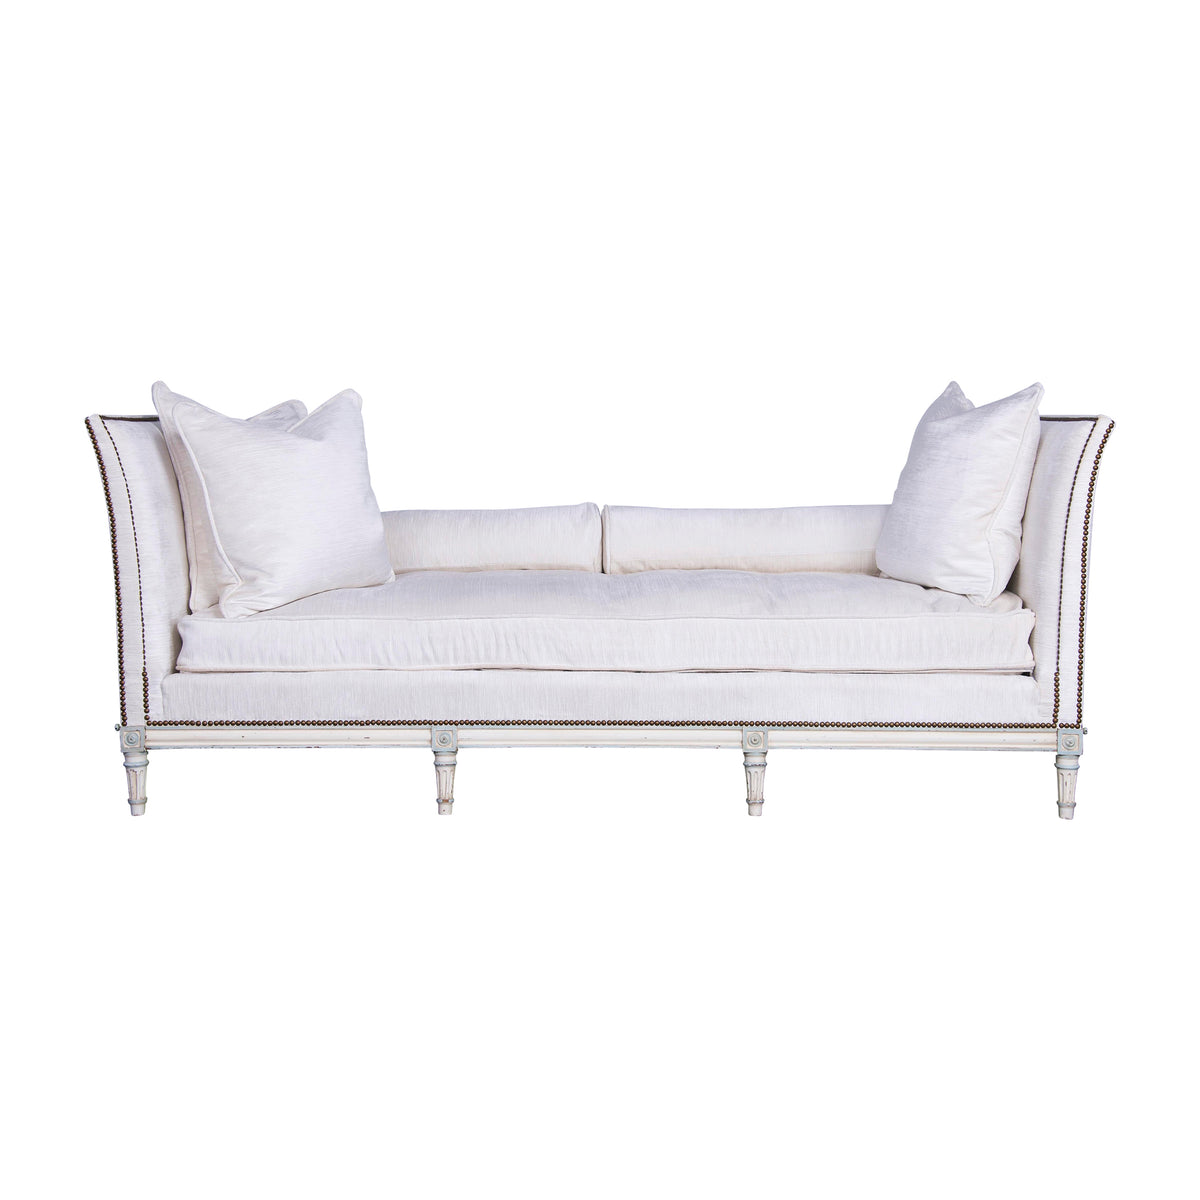 French Parisian Maison Gouffé Louis XVI Style Painted Daybed W/ Buttery White Fabric - Signed